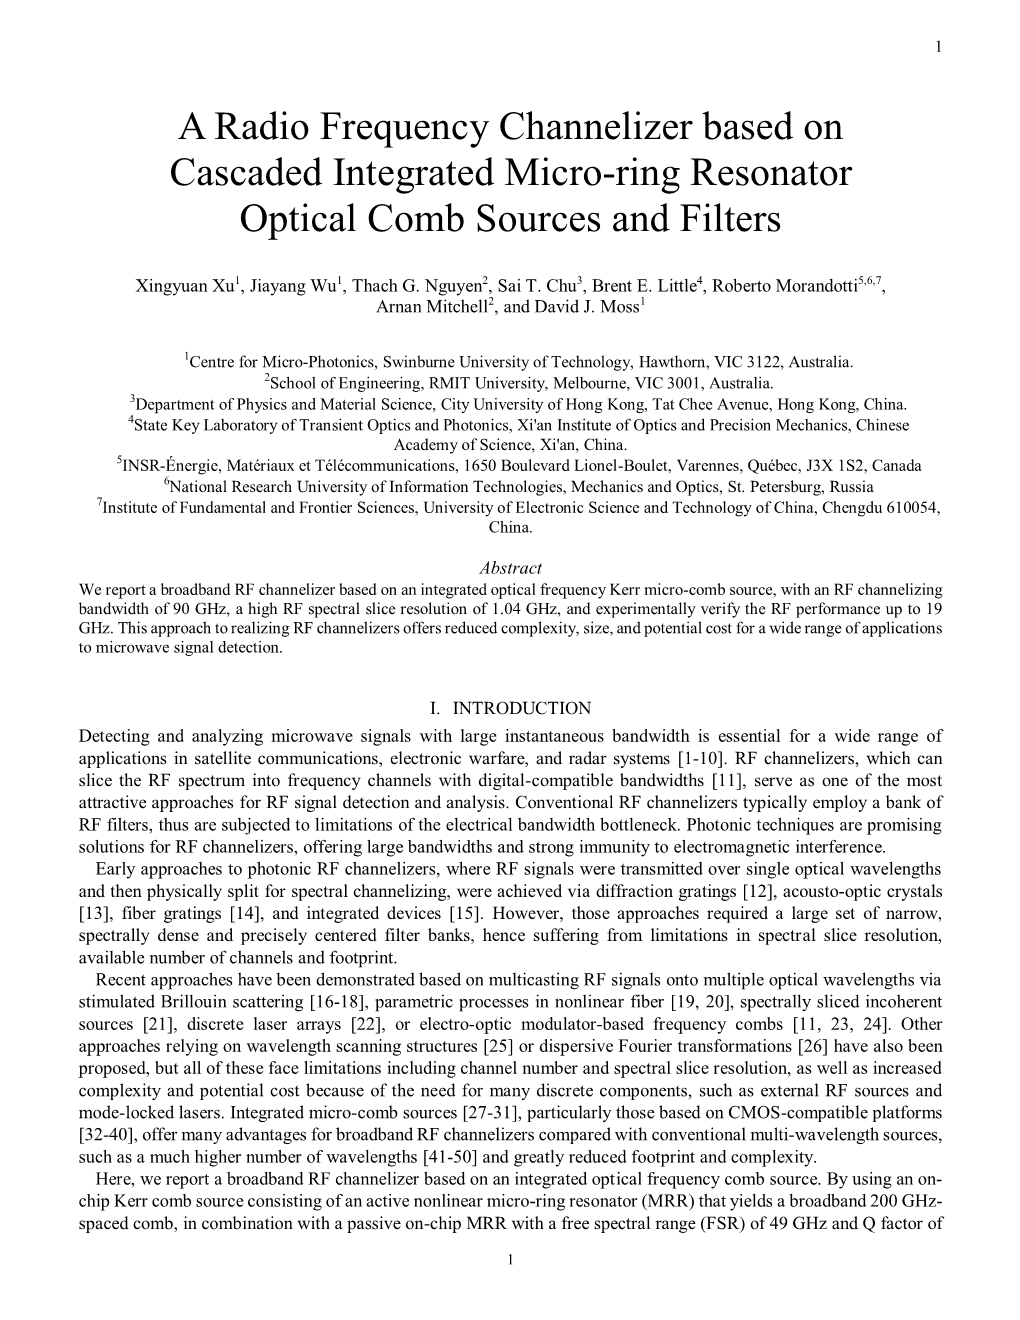 A Radio Frequency Channelizer Based on Cascaded Integrated Micro-Ring Resonator Optical Comb Sources and Filters